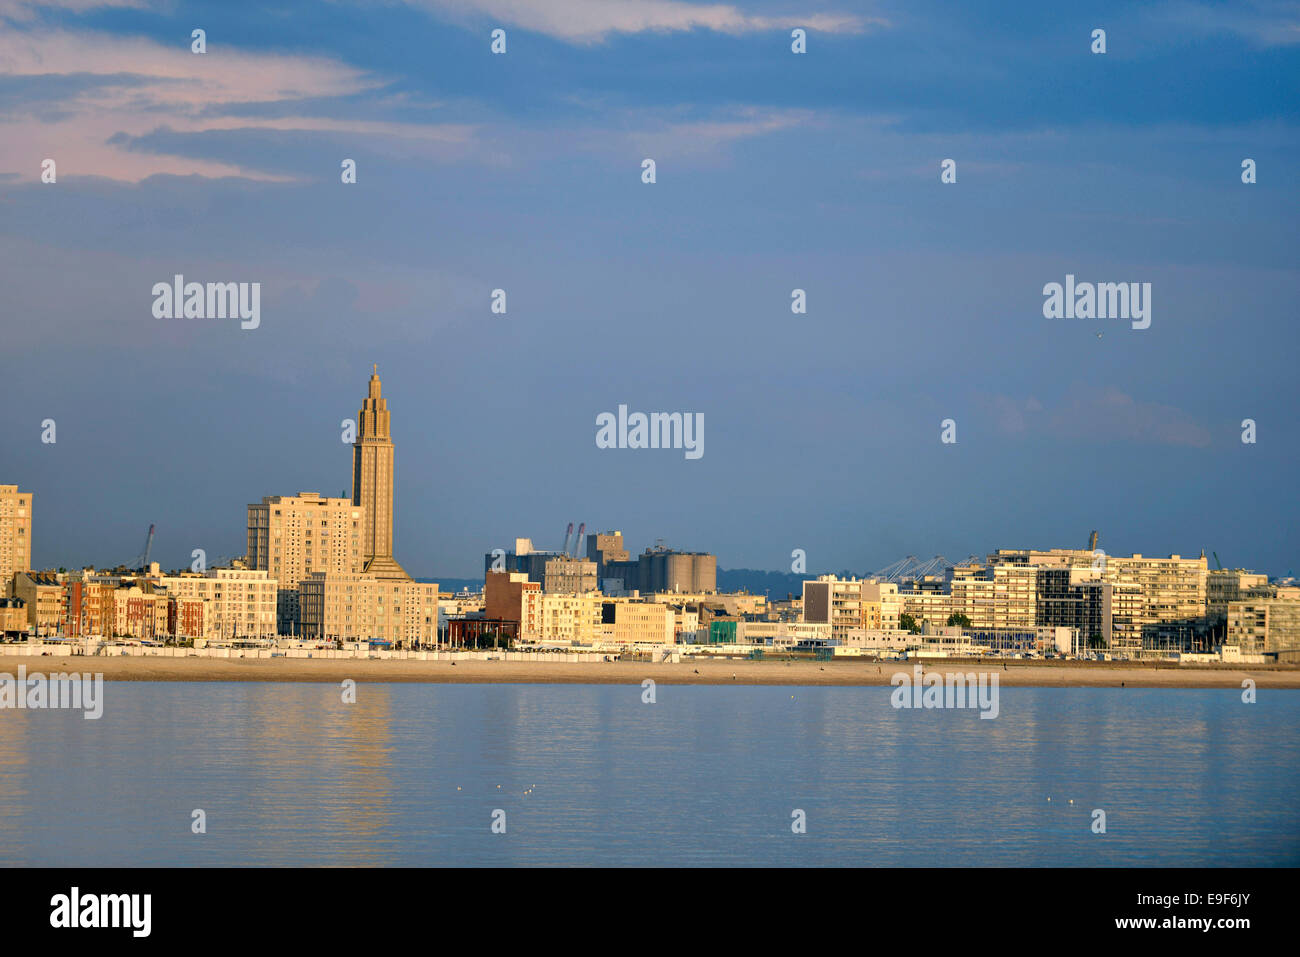 Le Havre (Normandy region): view towards the city from Sainte-Adresse Stock Photo